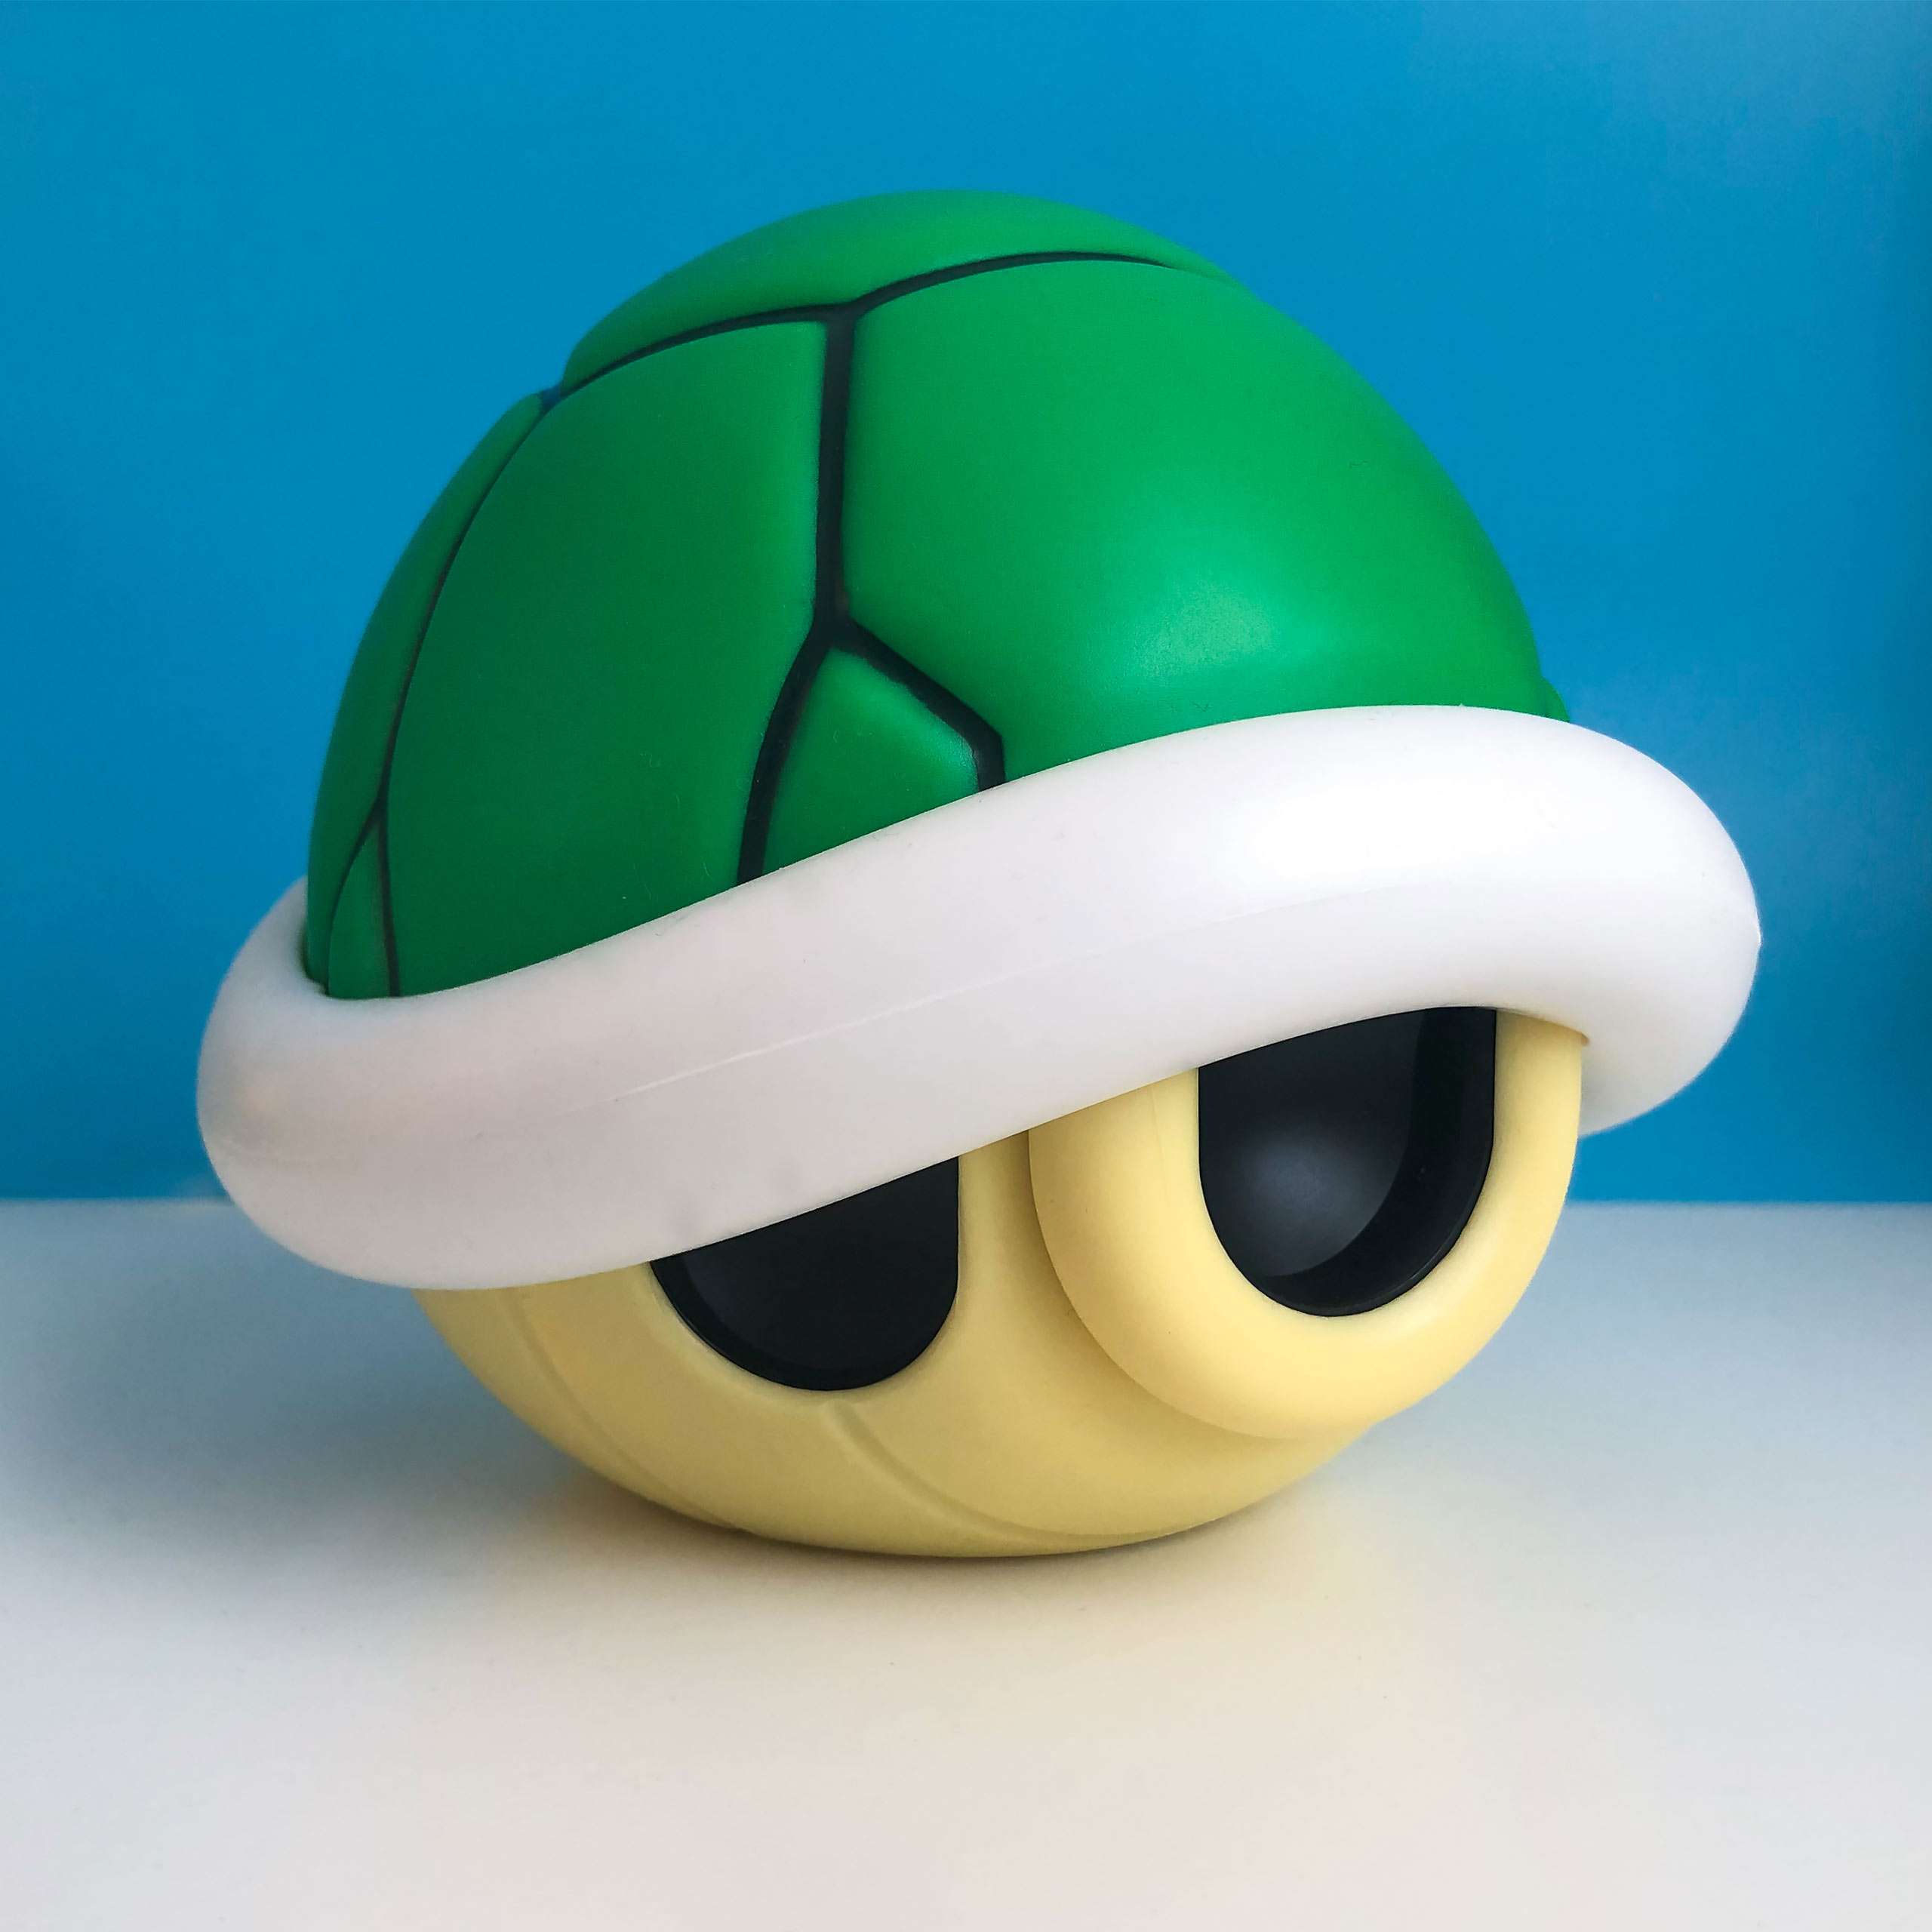 Super Mario - Green Shell Table Lamp with Sound